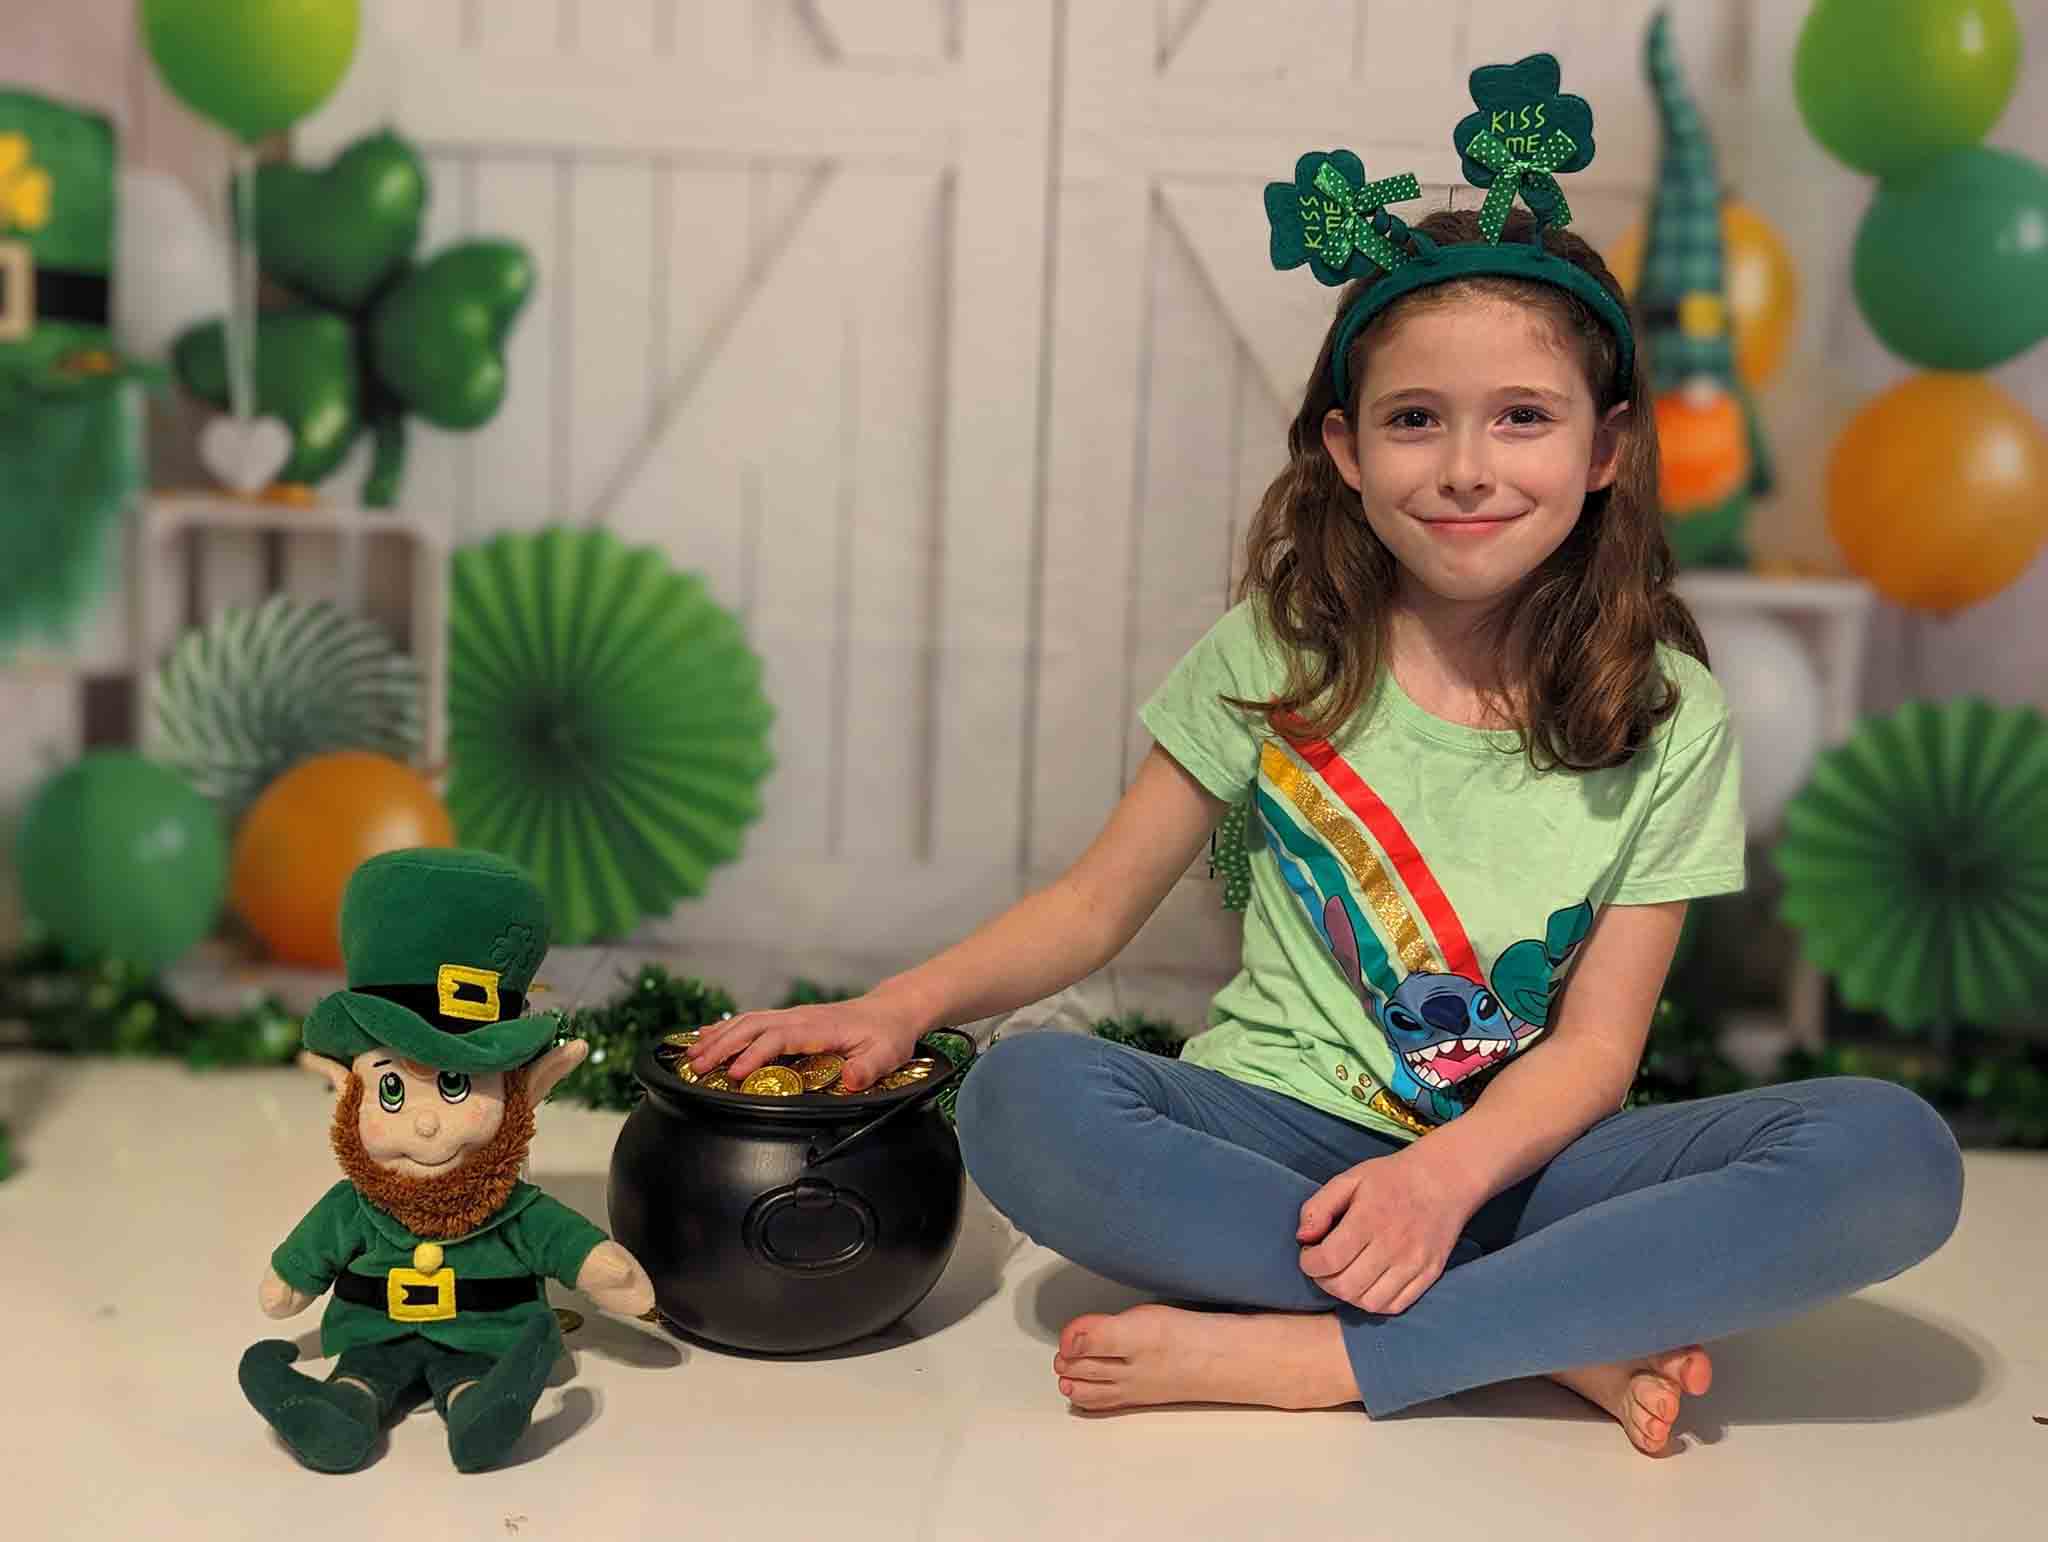 Kate St. Patrick's Day Backdrop Clover Lucky Day Green Designed by Emetselch